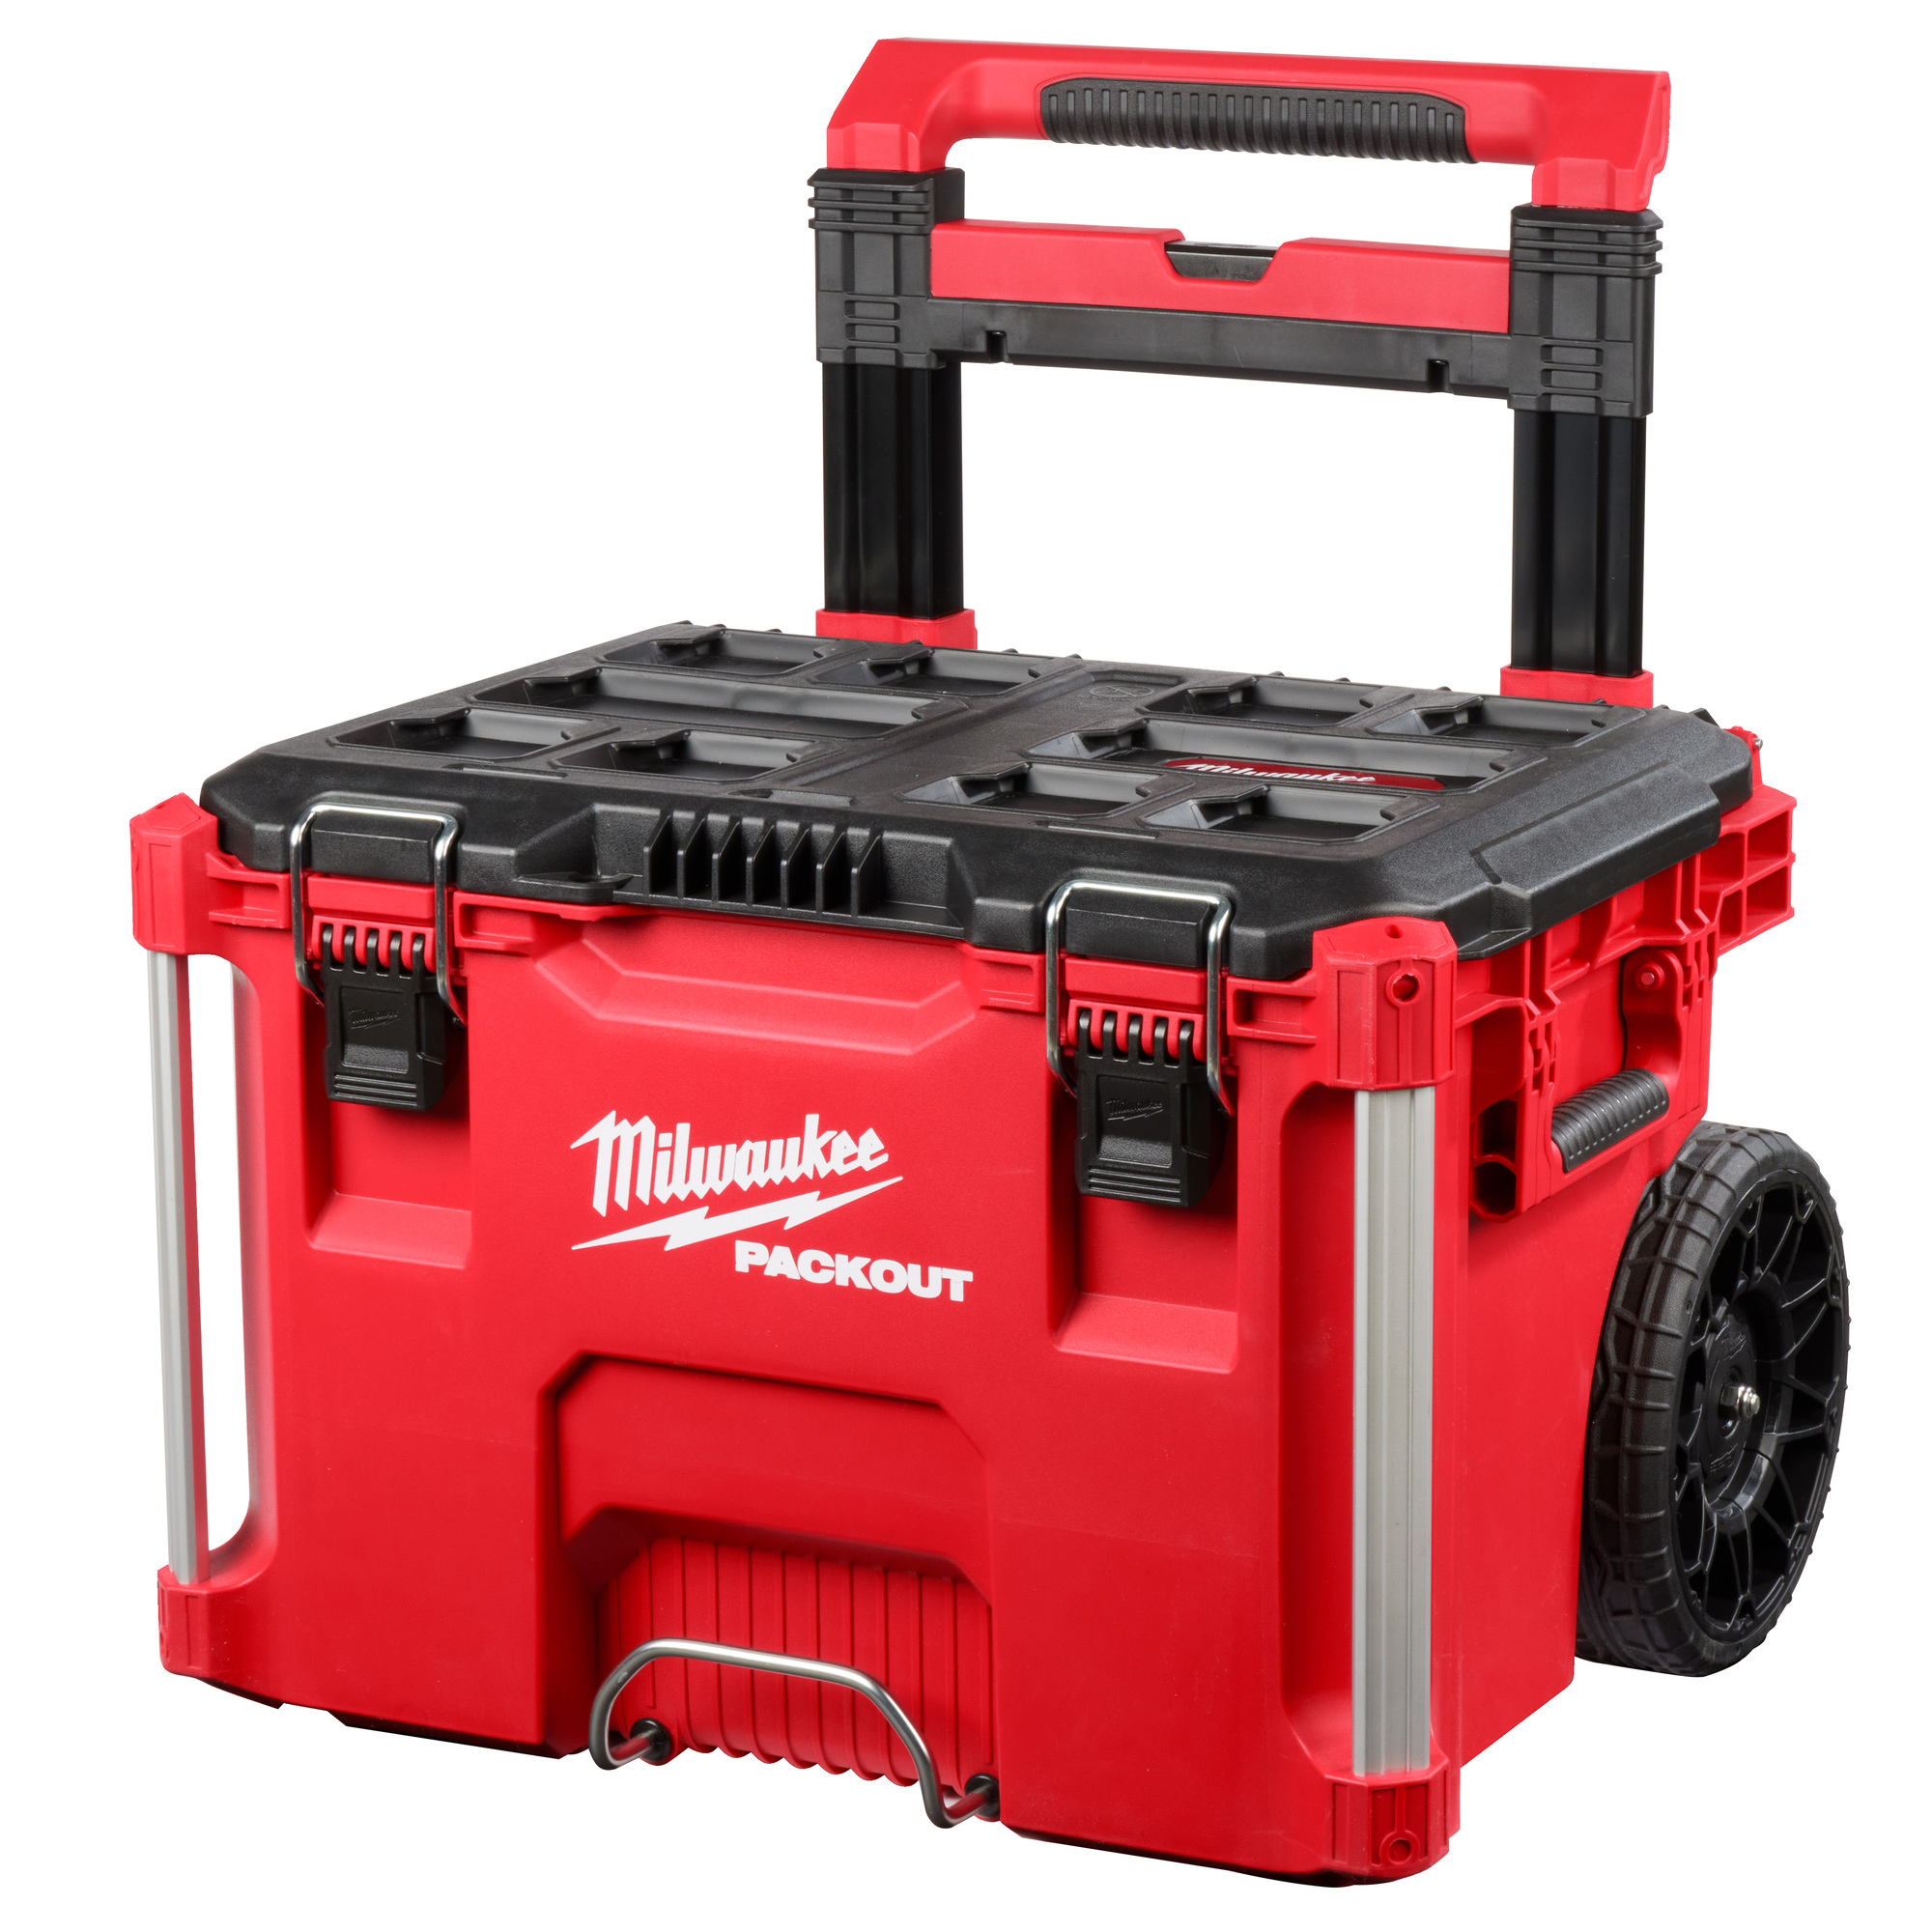 Milwaukee Packout Rolling Toolbox, 22.1in.L x 18.9in.W x 25.6in.H